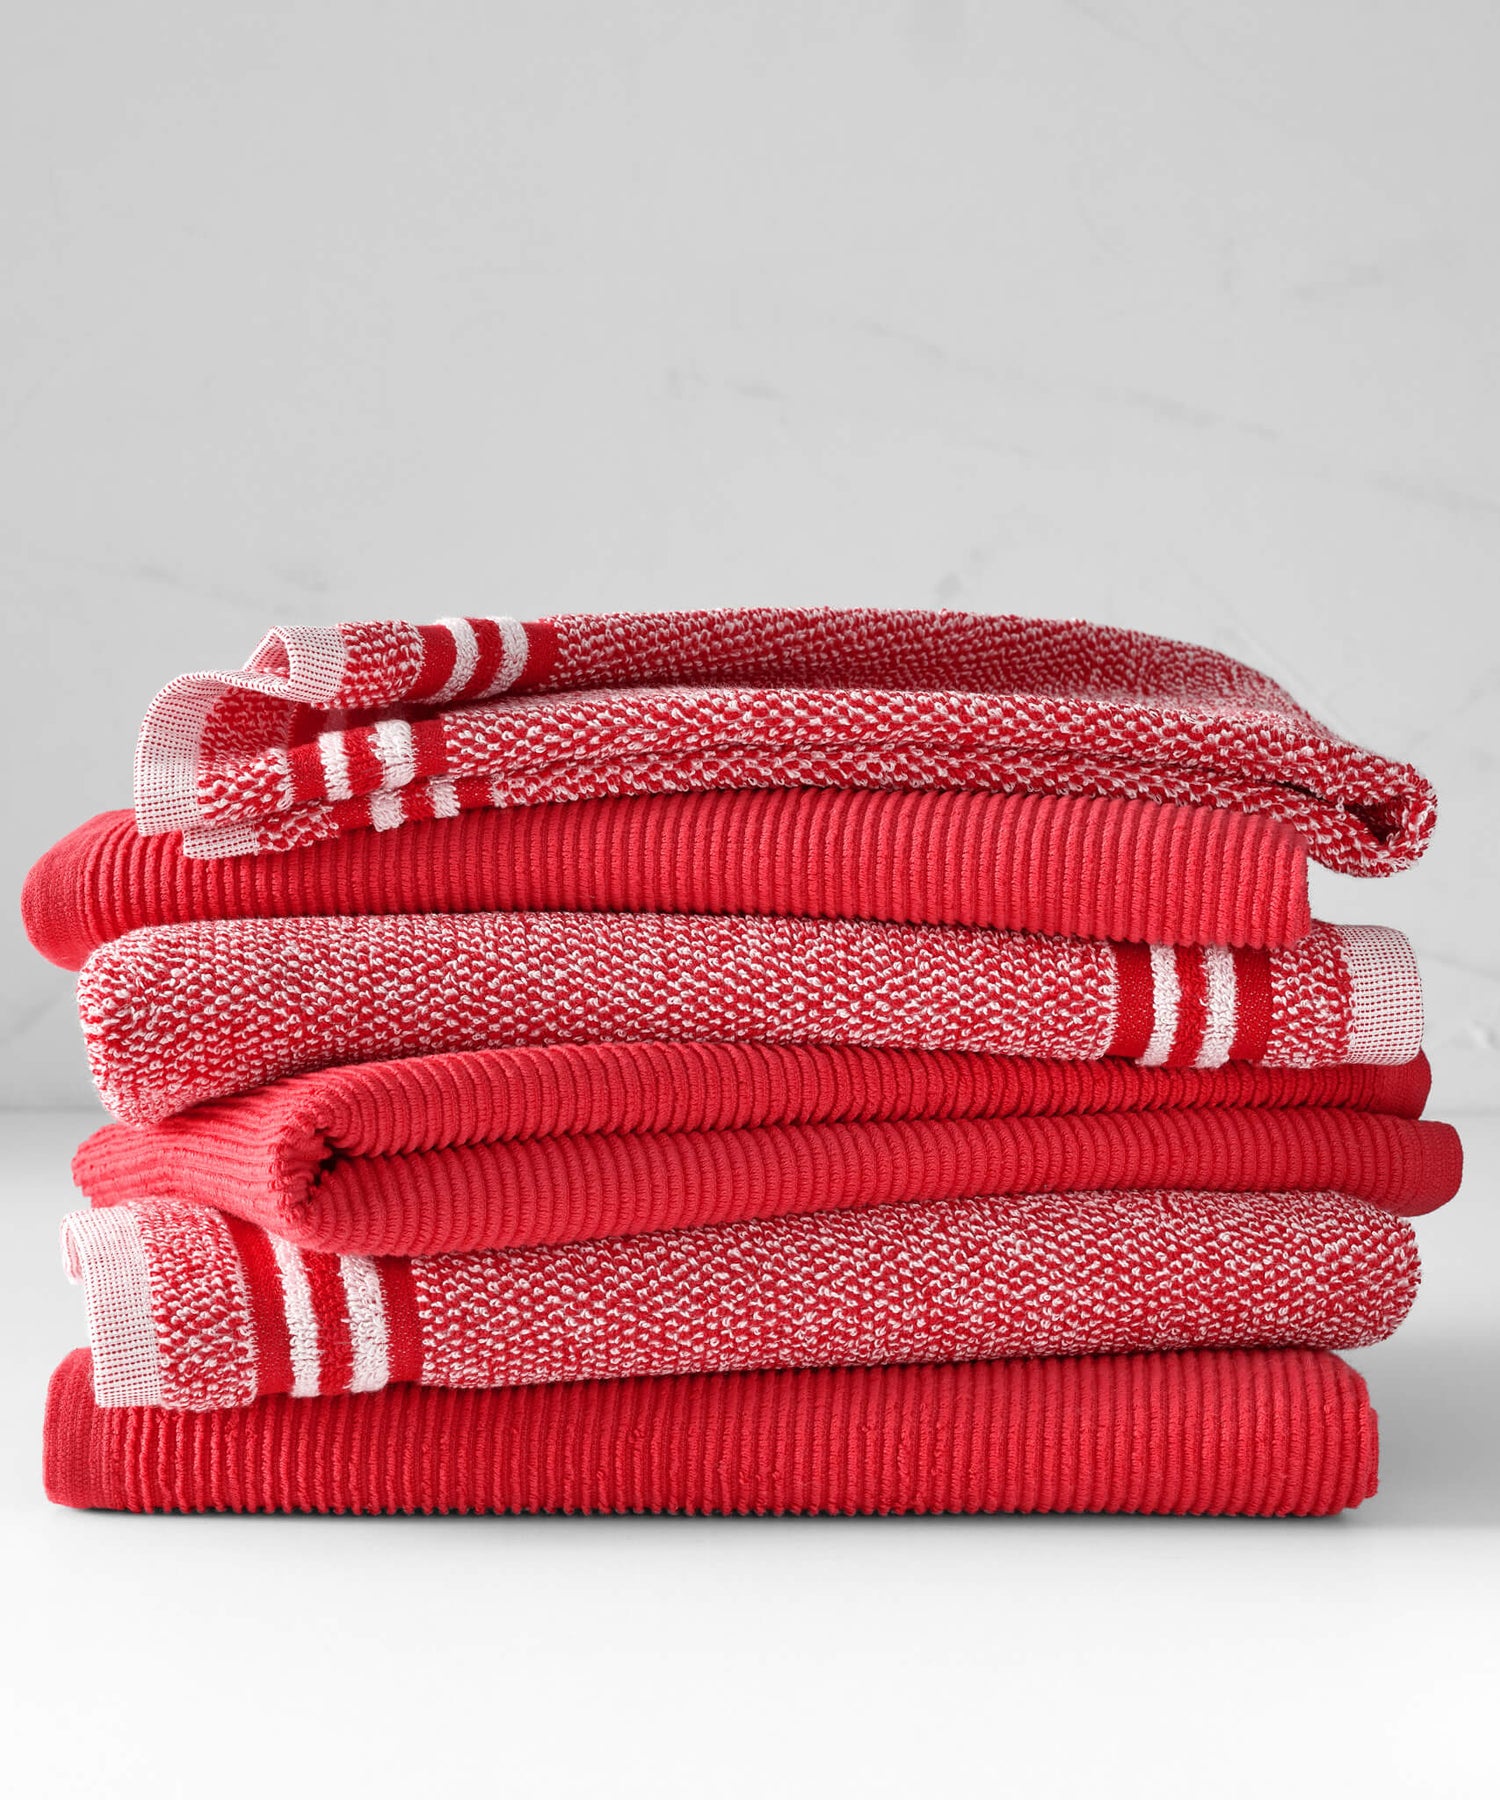  RIANGI Red Kitchen Towels - Set of 6 Cotton Dish